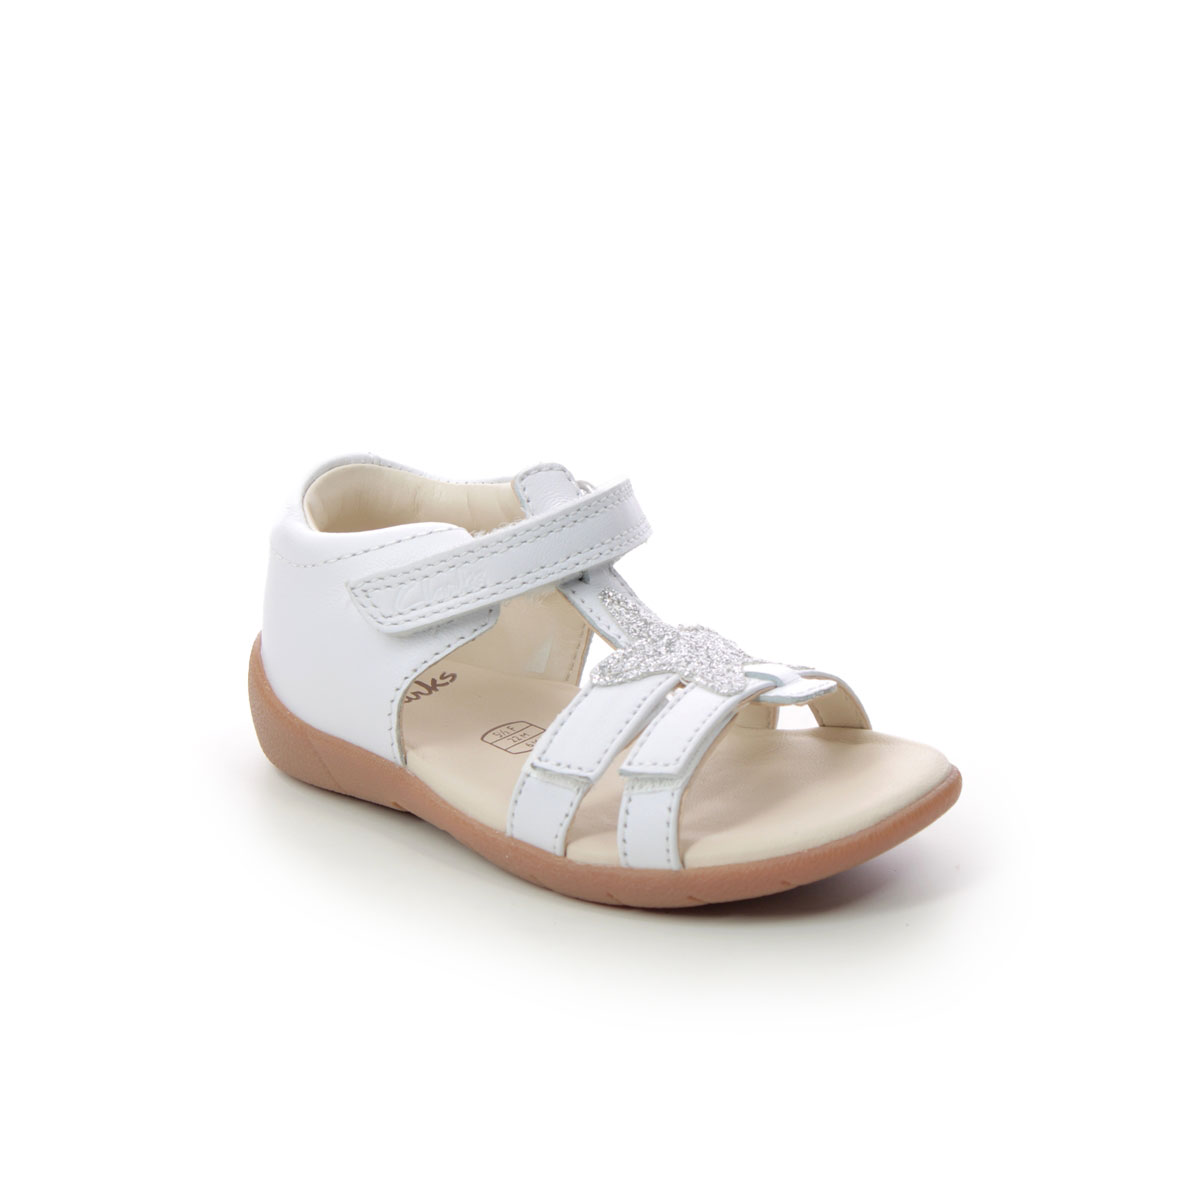 Clarks Zora Summer T WHITE LEATHER Kids sandals 5664-36F in a Plain Leather in Size 6.5